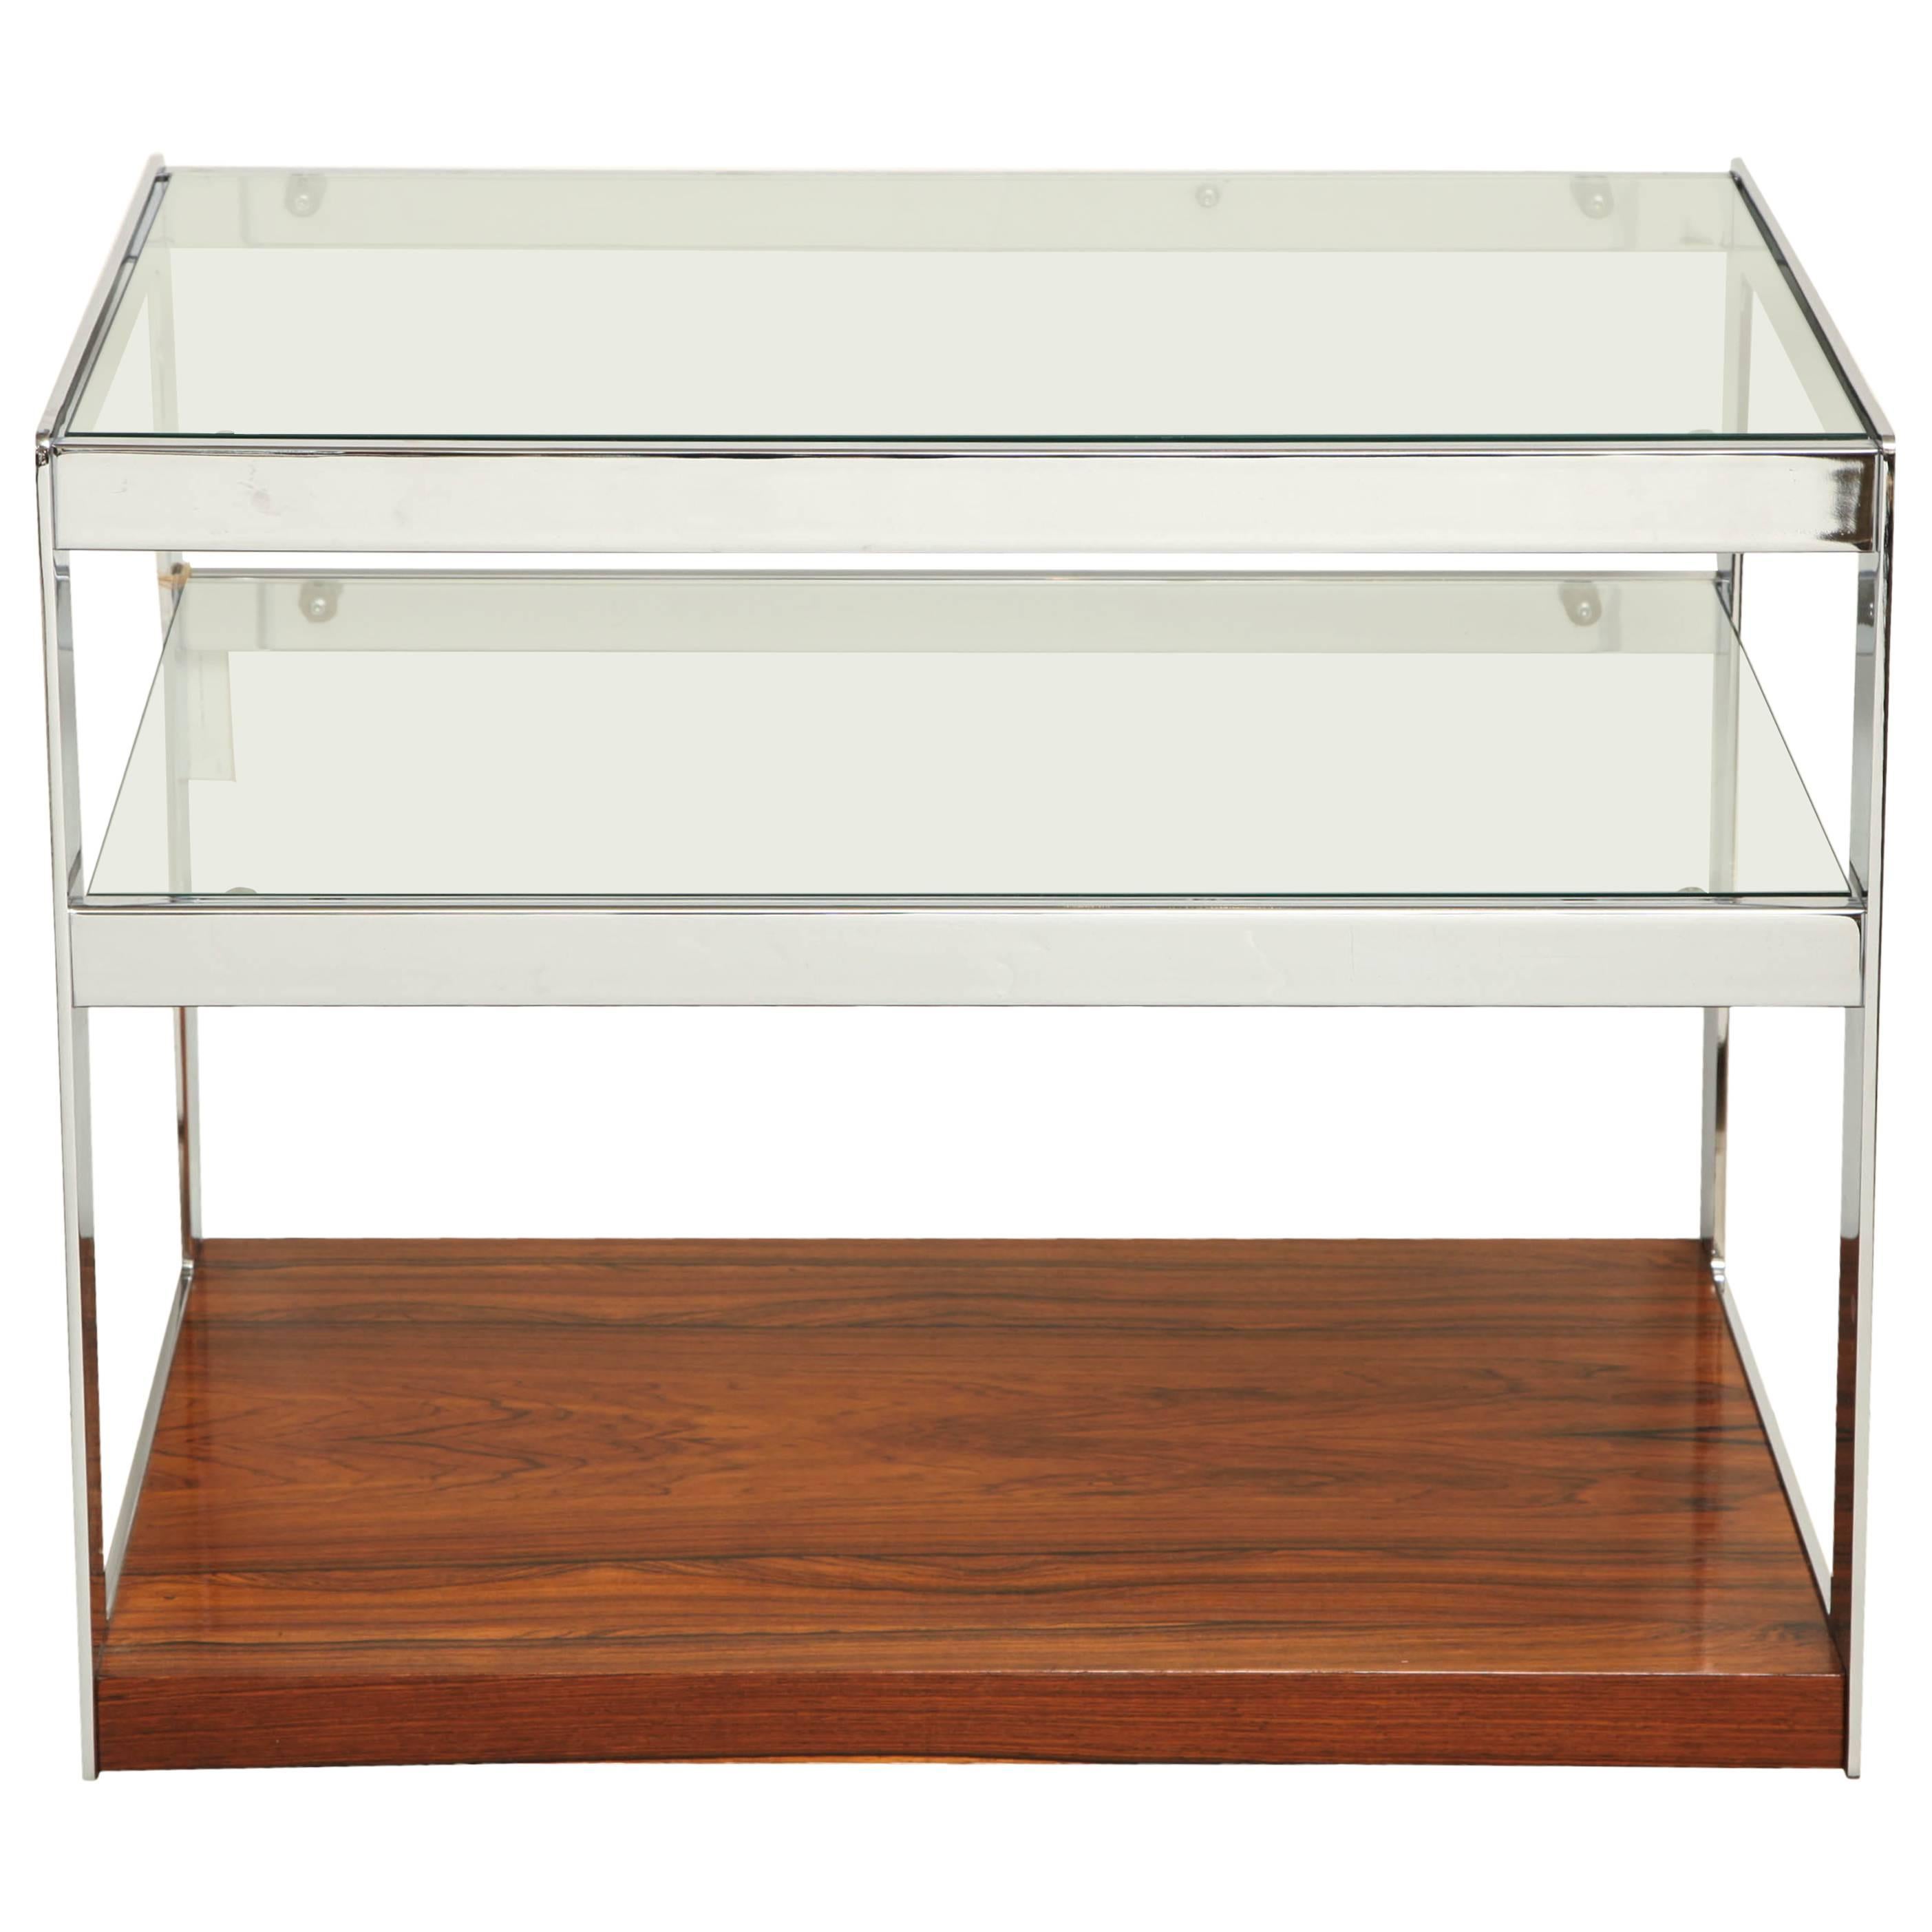 Two-tiered chrome bar cart with glass shelves and rosewood base on hidden castors. Designed by Richard Young for Merrow Associates, UK. Two available.